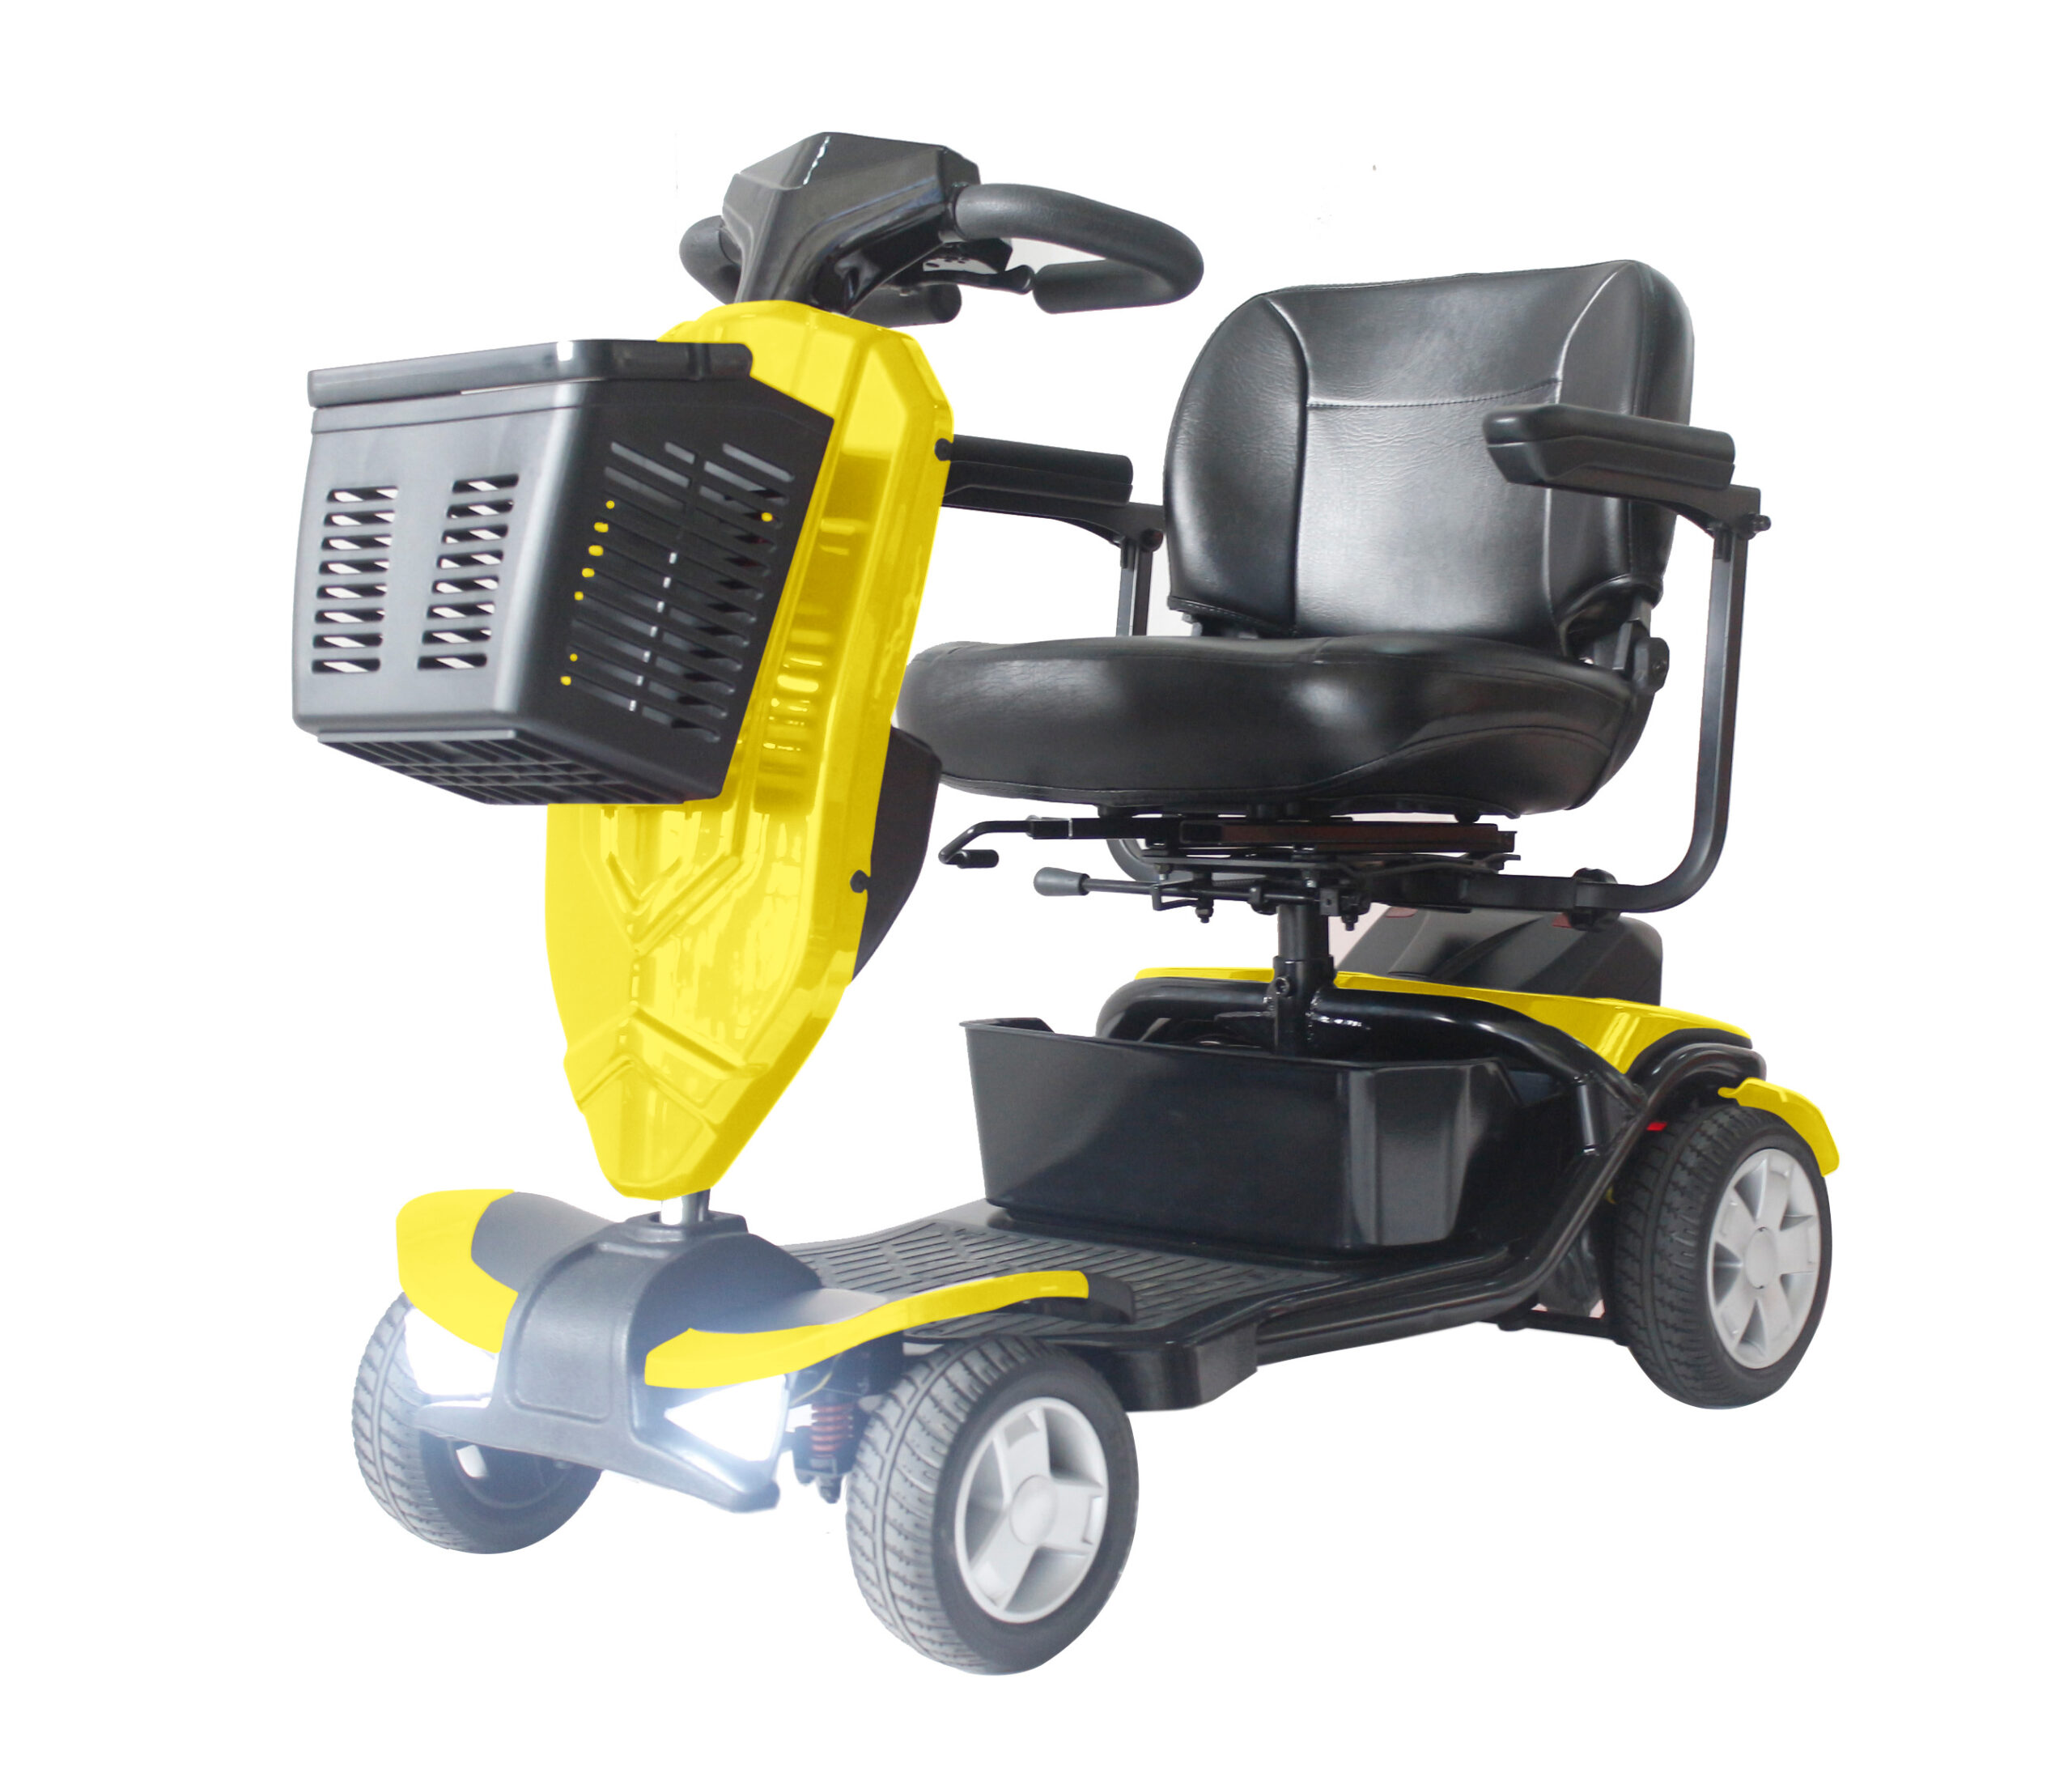 Top Gun Tranzforma Power Chair & Mobility Scooter | Mobility